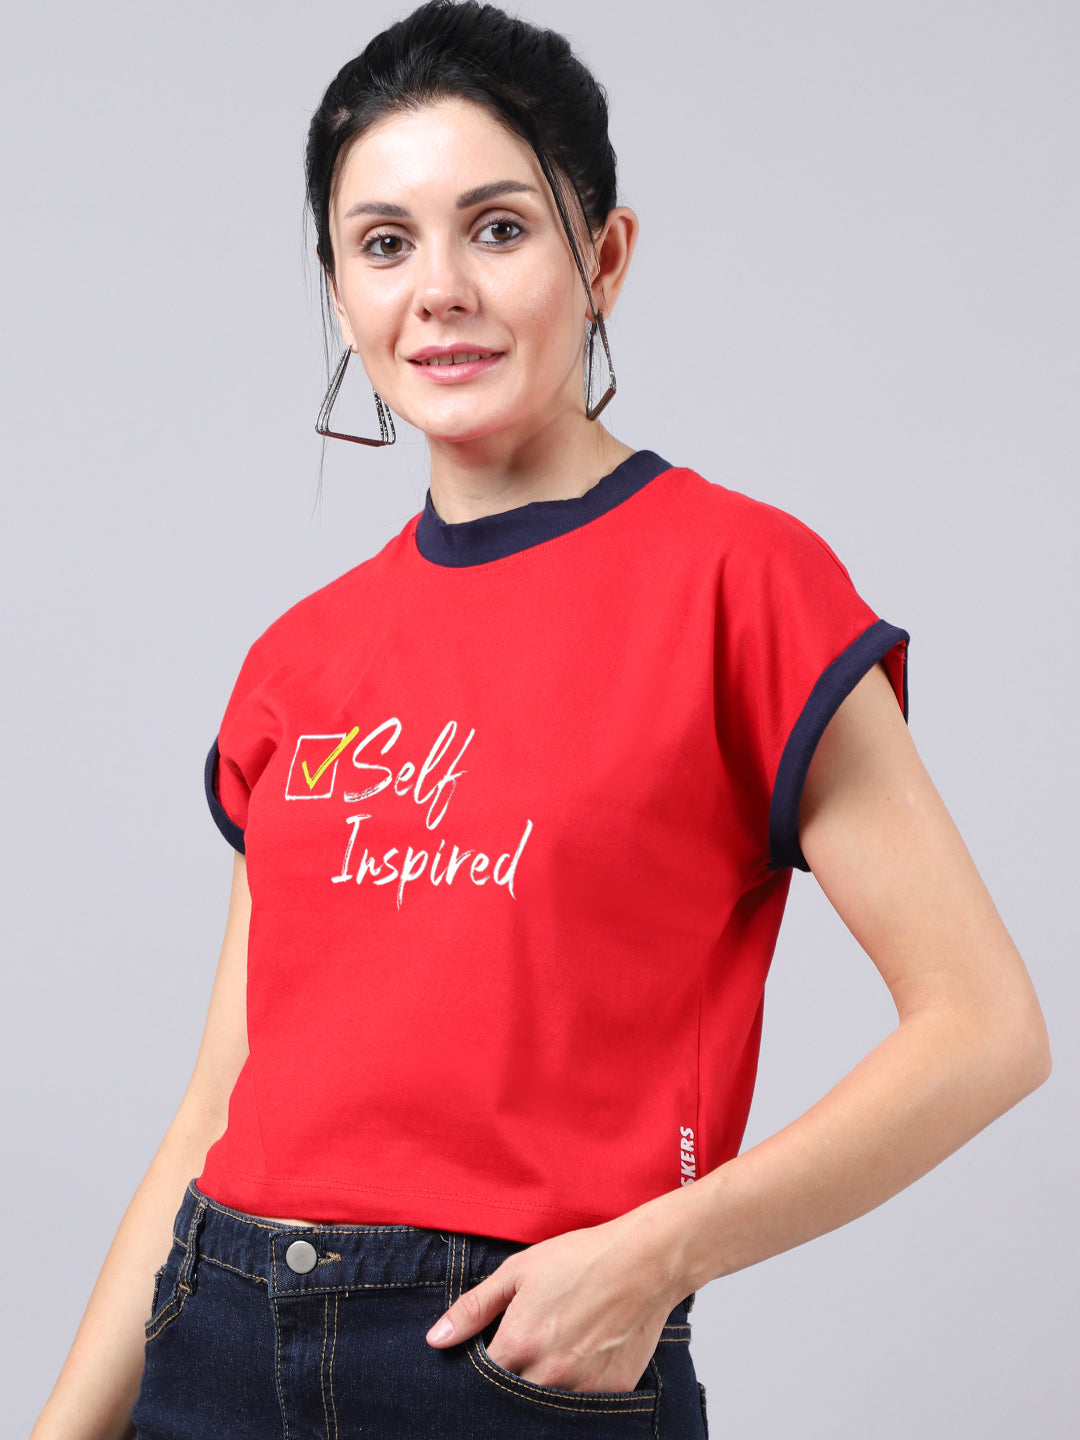 Fbar Women's Self Inspired Printed Cotton T-Shirt - Friskers